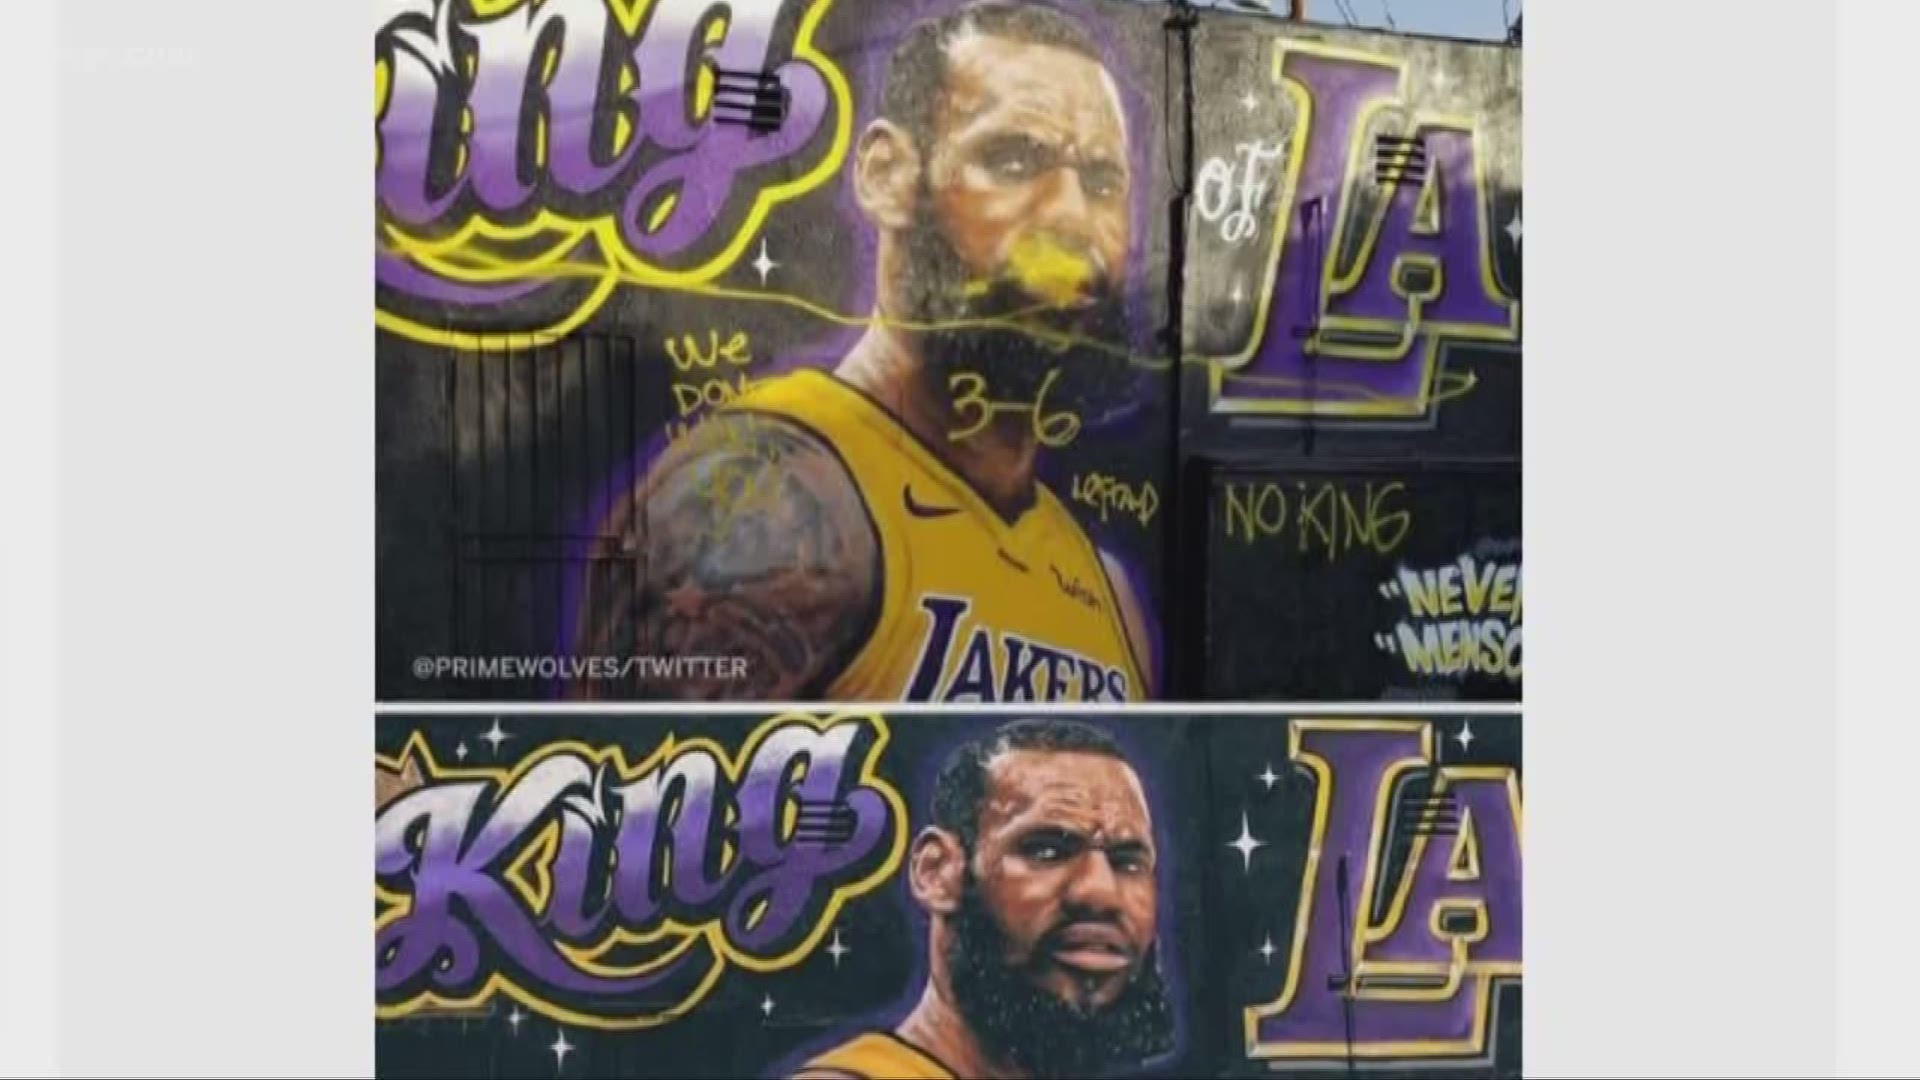 July 9, 2018: 'We don't want you.' That's one of the messages painted on a LeBron James mural in California.